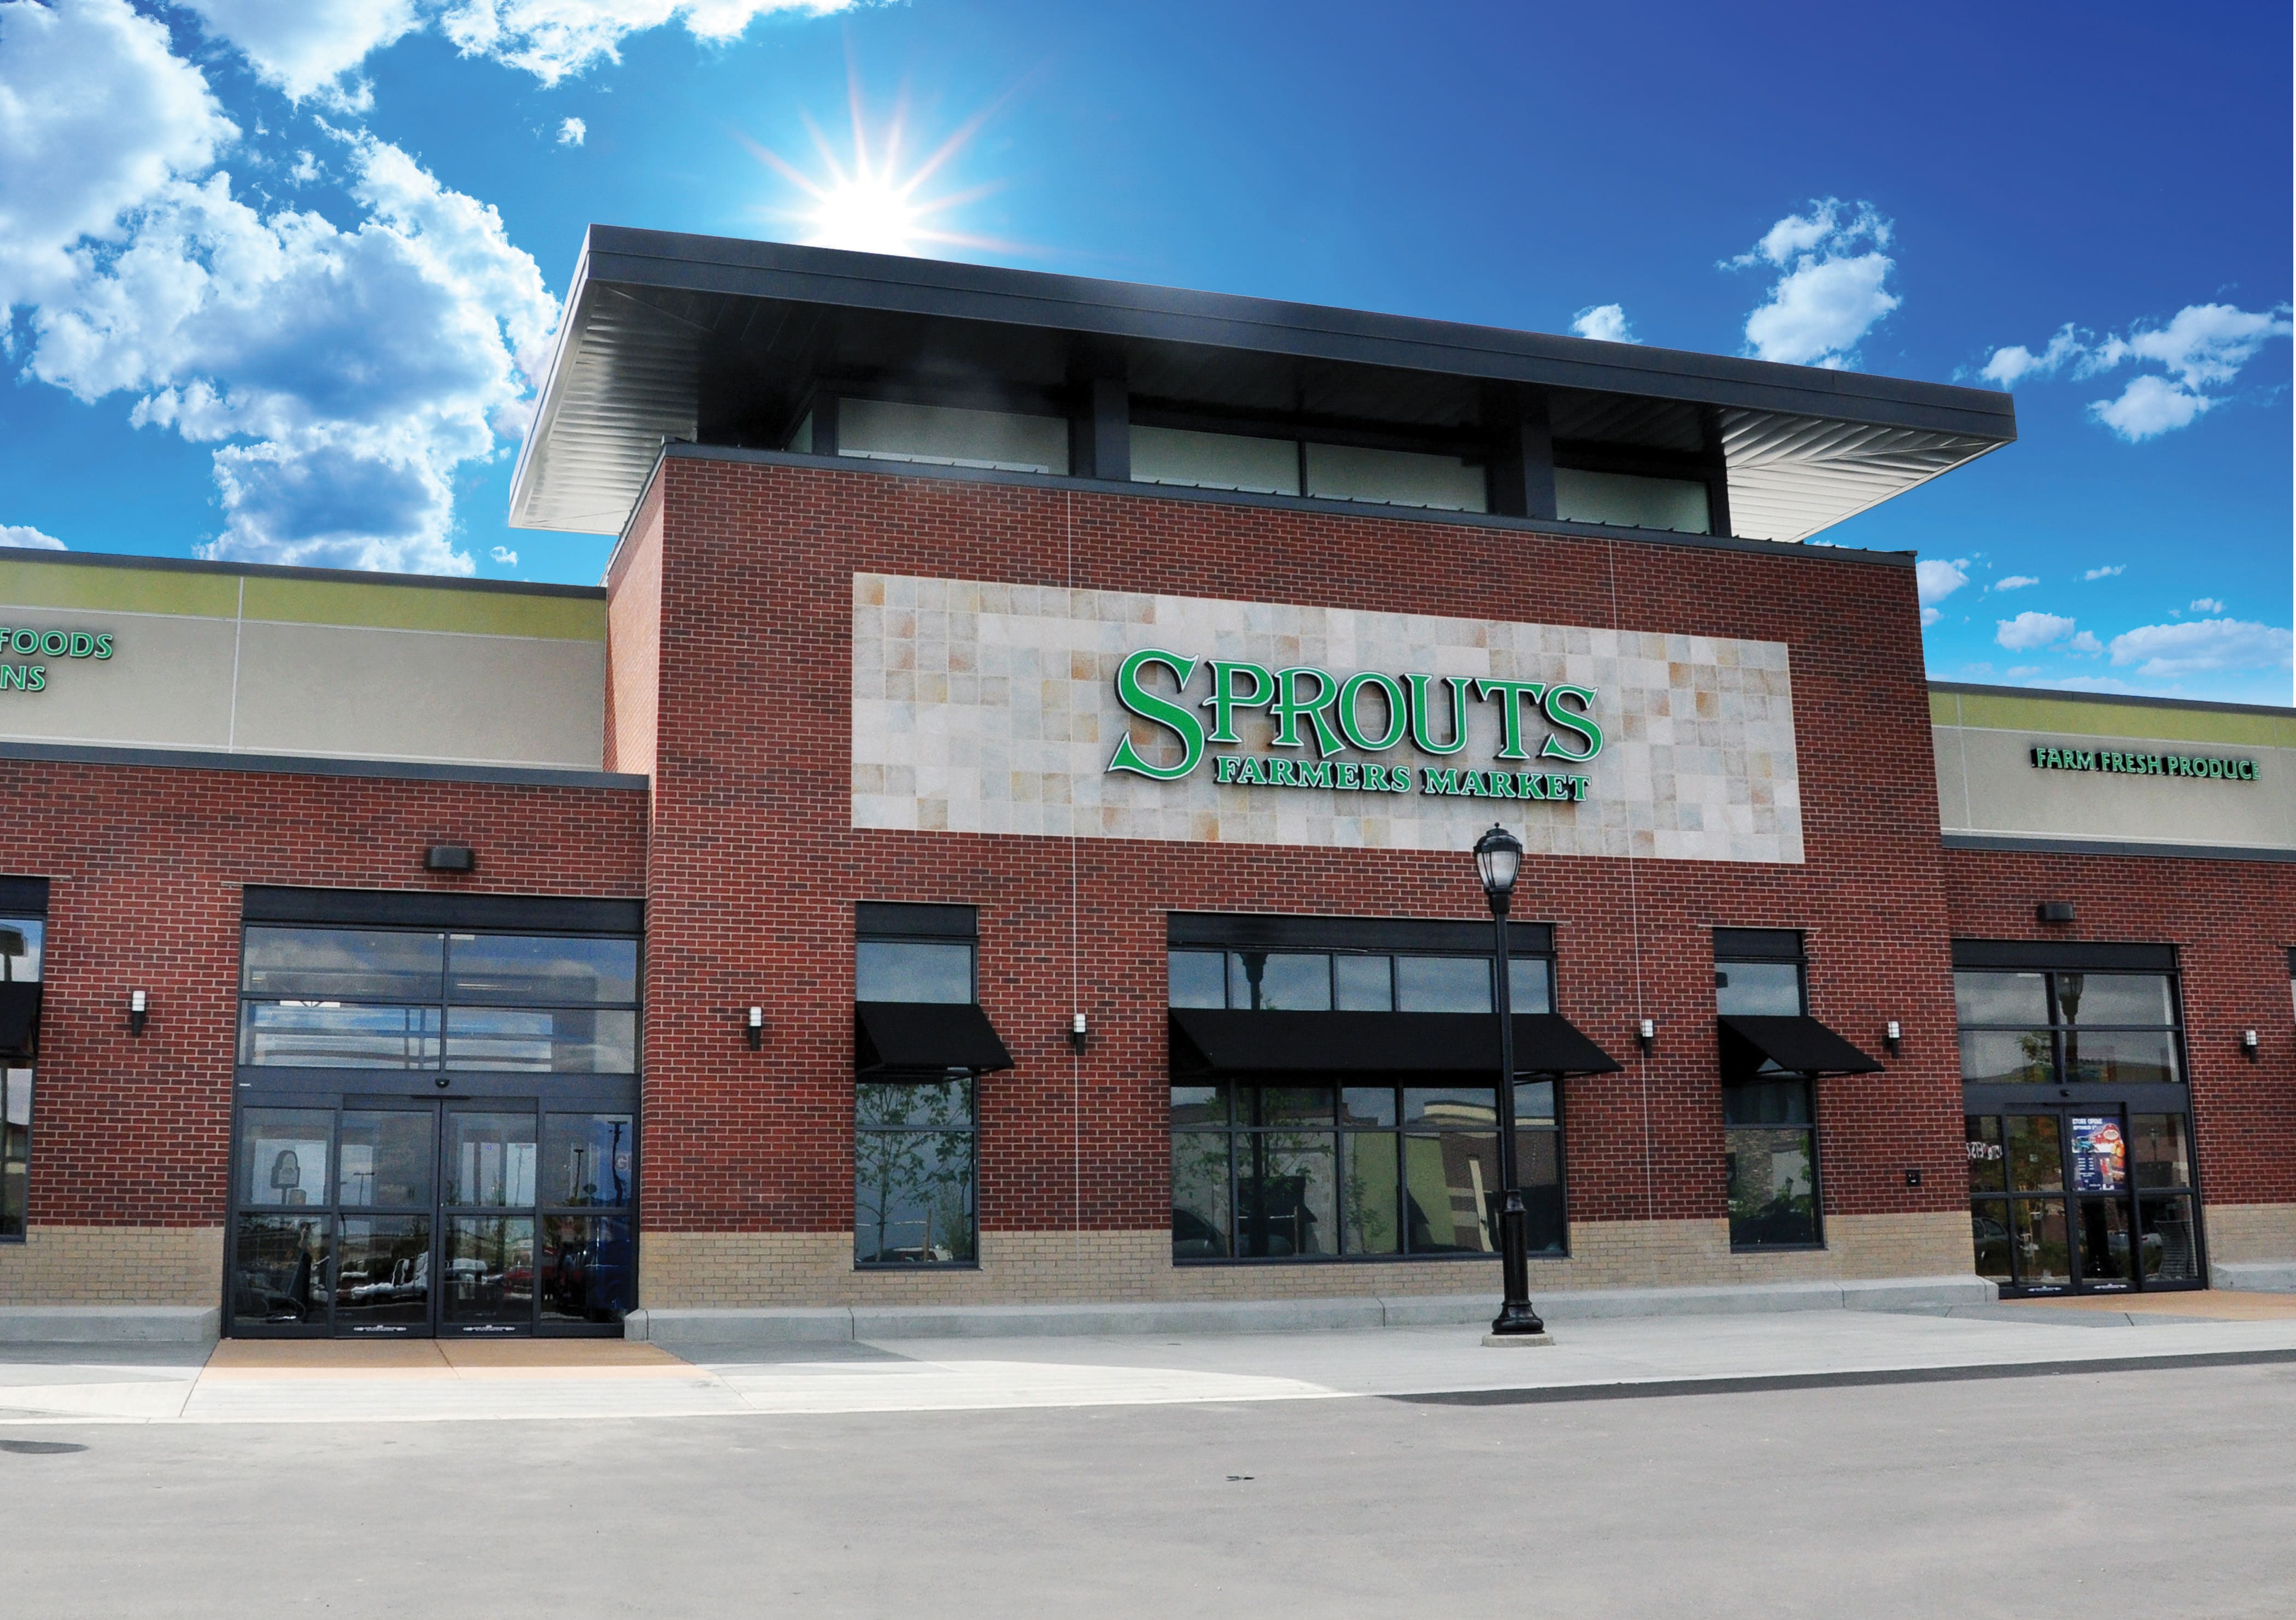 Photo of a storefront of a Sprouts Farmers Market Store against a blue, sunny sky